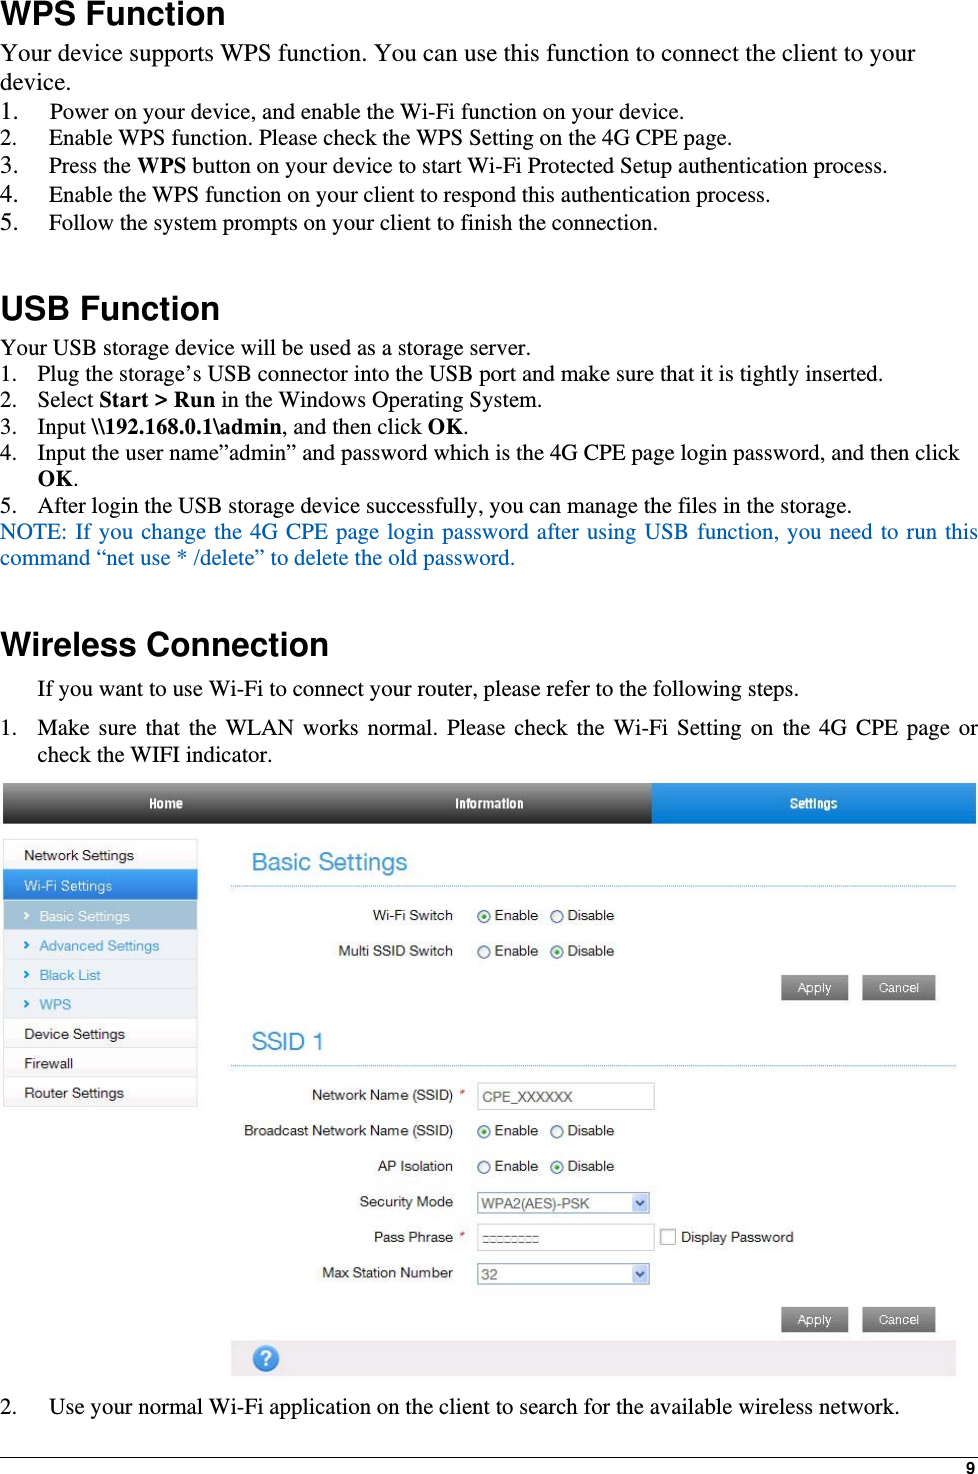 9WPS Function Your device supports WPS function. You can use this function to connect the client to your device. 1.  Power on your device, and enable the Wi-Fi function on your device. 2.   Enable WPS function. Please check the WPS Setting on the 4G CPE page. 3.  Press the WPS button on your device to start Wi-Fi Protected Setup authentication process. 4.   Enable the WPS function on your client to respond this authentication process. 5.   Follow the system prompts on your client to finish the connection.  USB Function Your USB storage device will be used as a storage server. 1. Plug the storage’s USB connector into the USB port and make sure that it is tightly inserted.   2. Select Start &gt; Run in the Windows Operating System.   3. Input \\192.168.0.1\admin, and then click OK. 4. Input the user name”admin” and password which is the 4G CPE page login password, and then click OK.  5. After login the USB storage device successfully, you can manage the files in the storage. NOTE: If you change the 4G CPE page login password after using USB function, you need to run this command “net use * /delete” to delete the old password.    Wireless Connection If you want to use Wi-Fi to connect your router, please refer to the following steps. 1. Make sure that the WLAN works normal. Please check the Wi-Fi Setting on the 4G CPE page or check the WIFI indicator.  2.   Use your normal Wi-Fi application on the client to search for the available wireless network. 